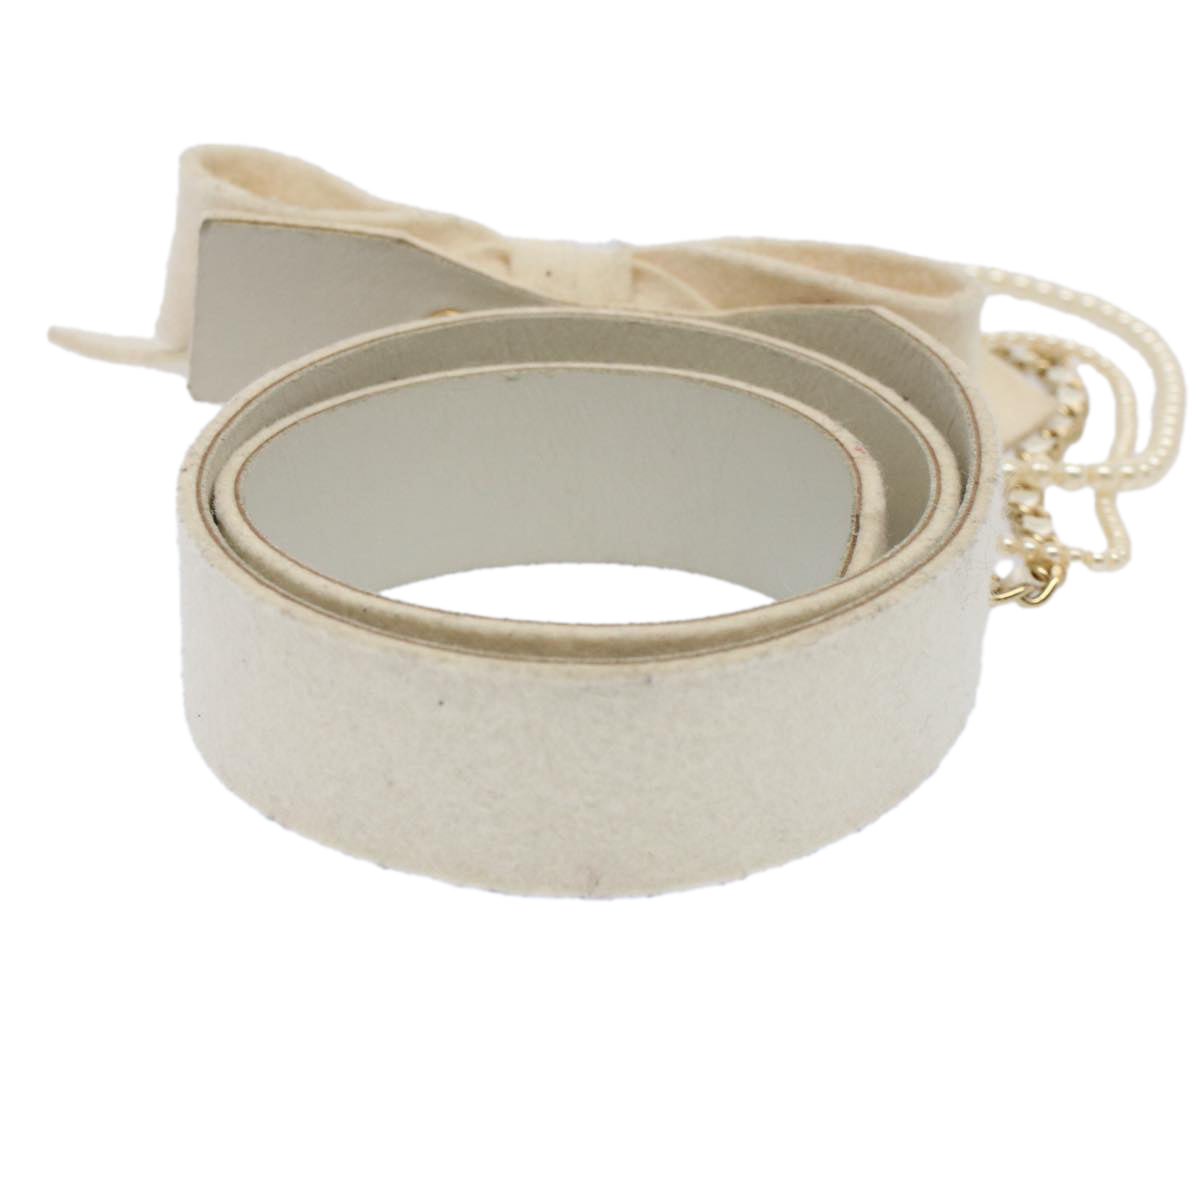 CHANEL Pearl Belt Wool 80/32 37.4"" White CC Auth bs9177